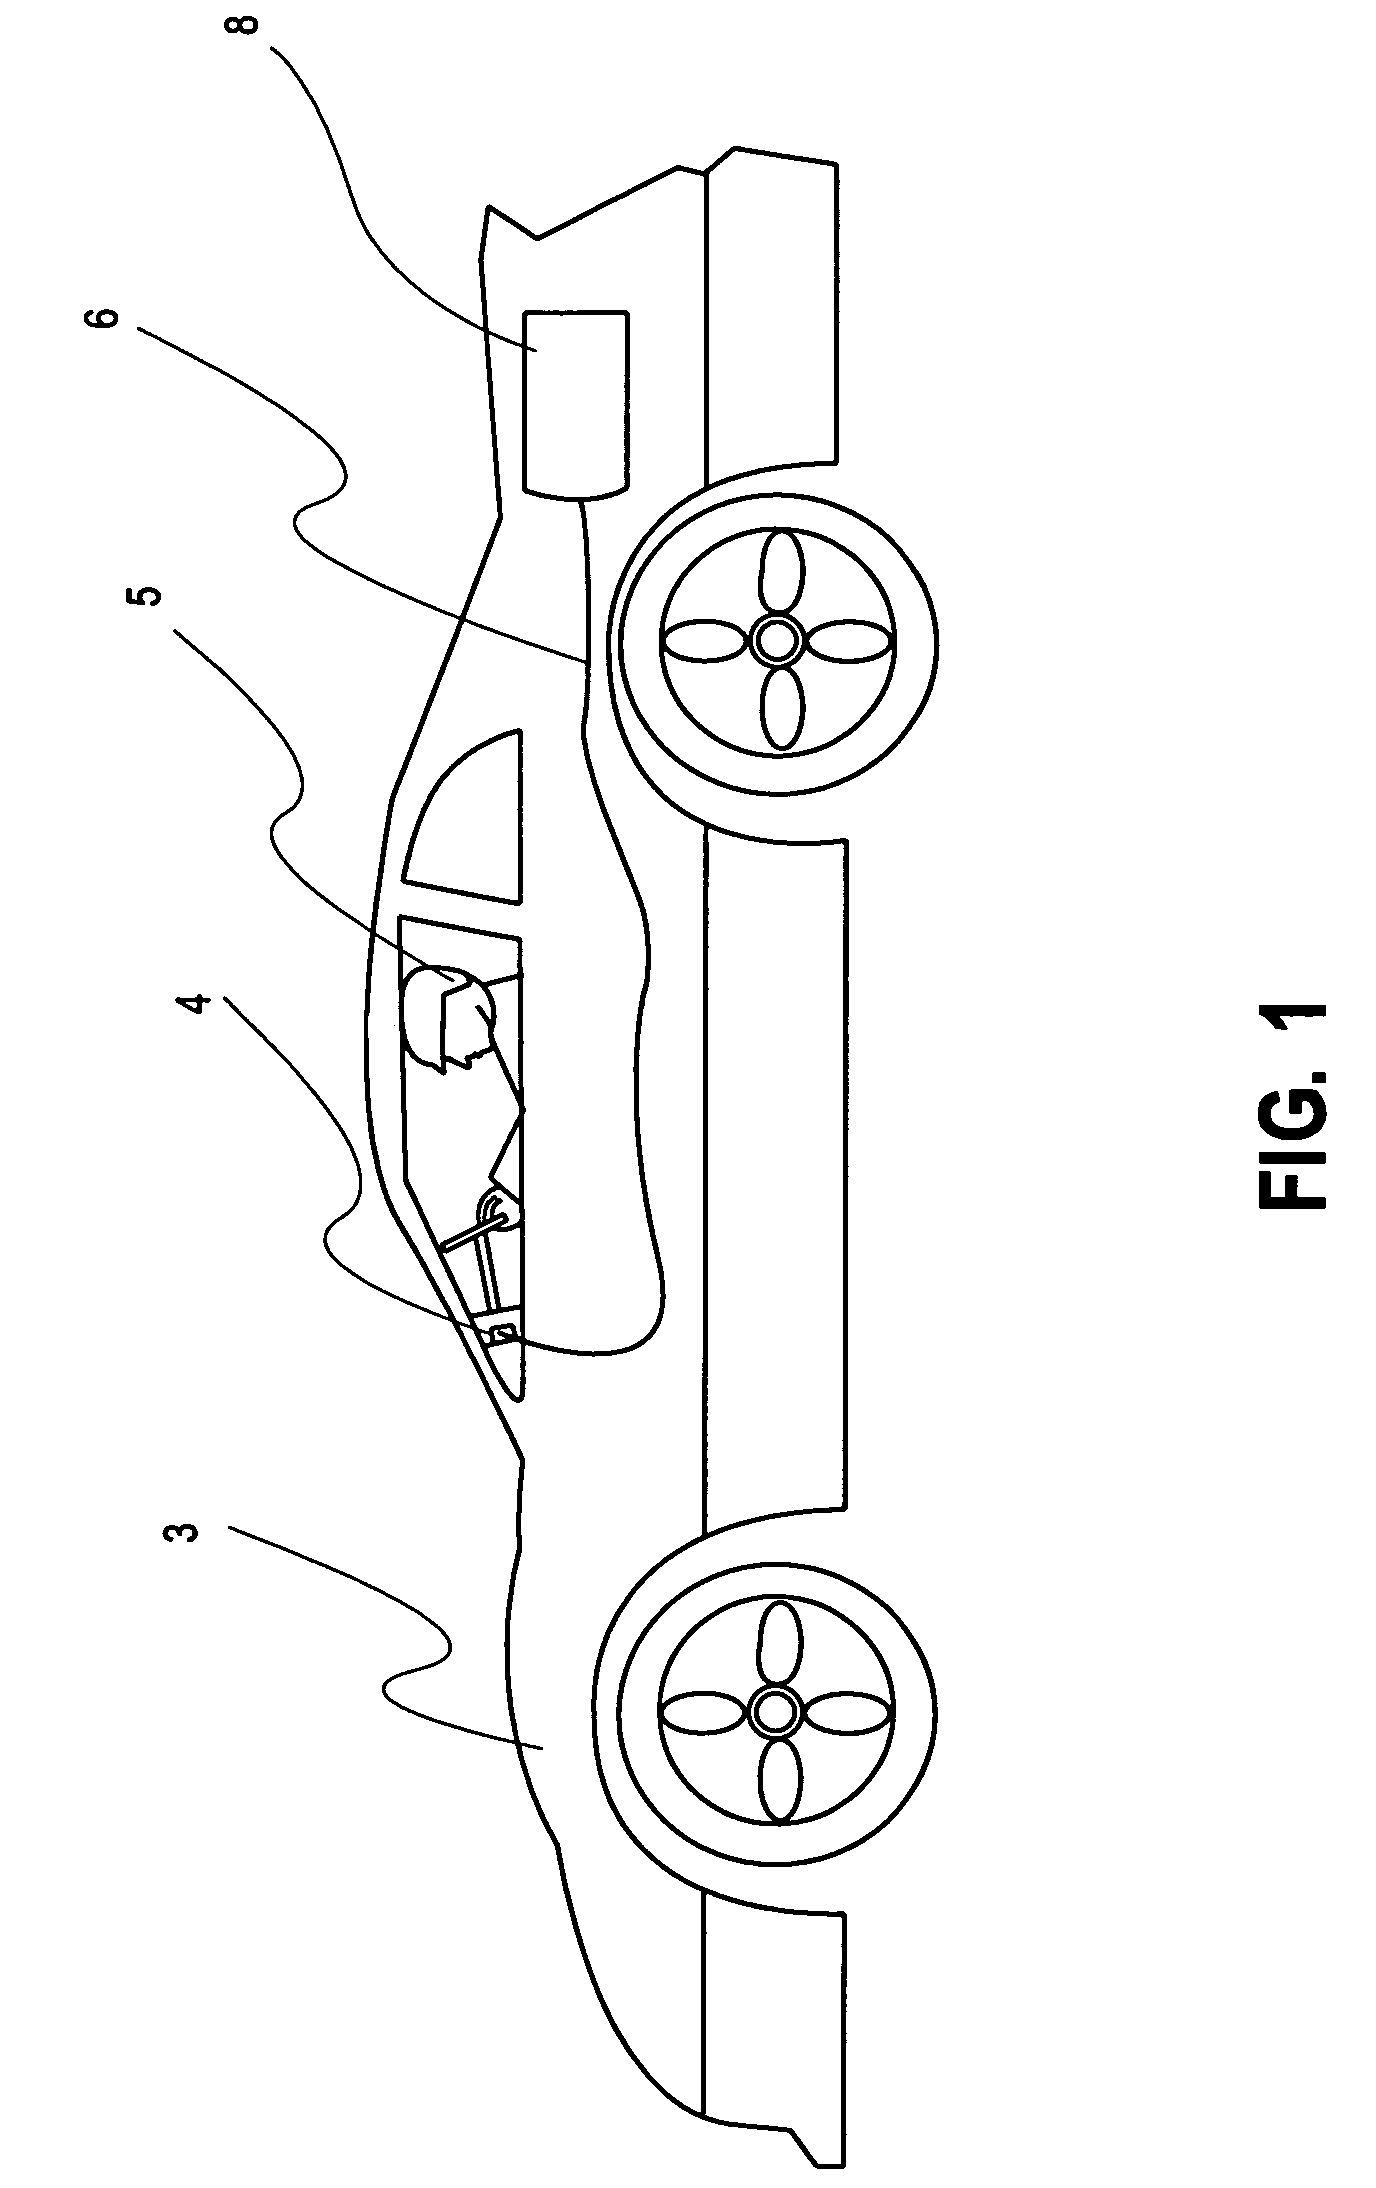 Driver controlled wedge and track bar adjustors